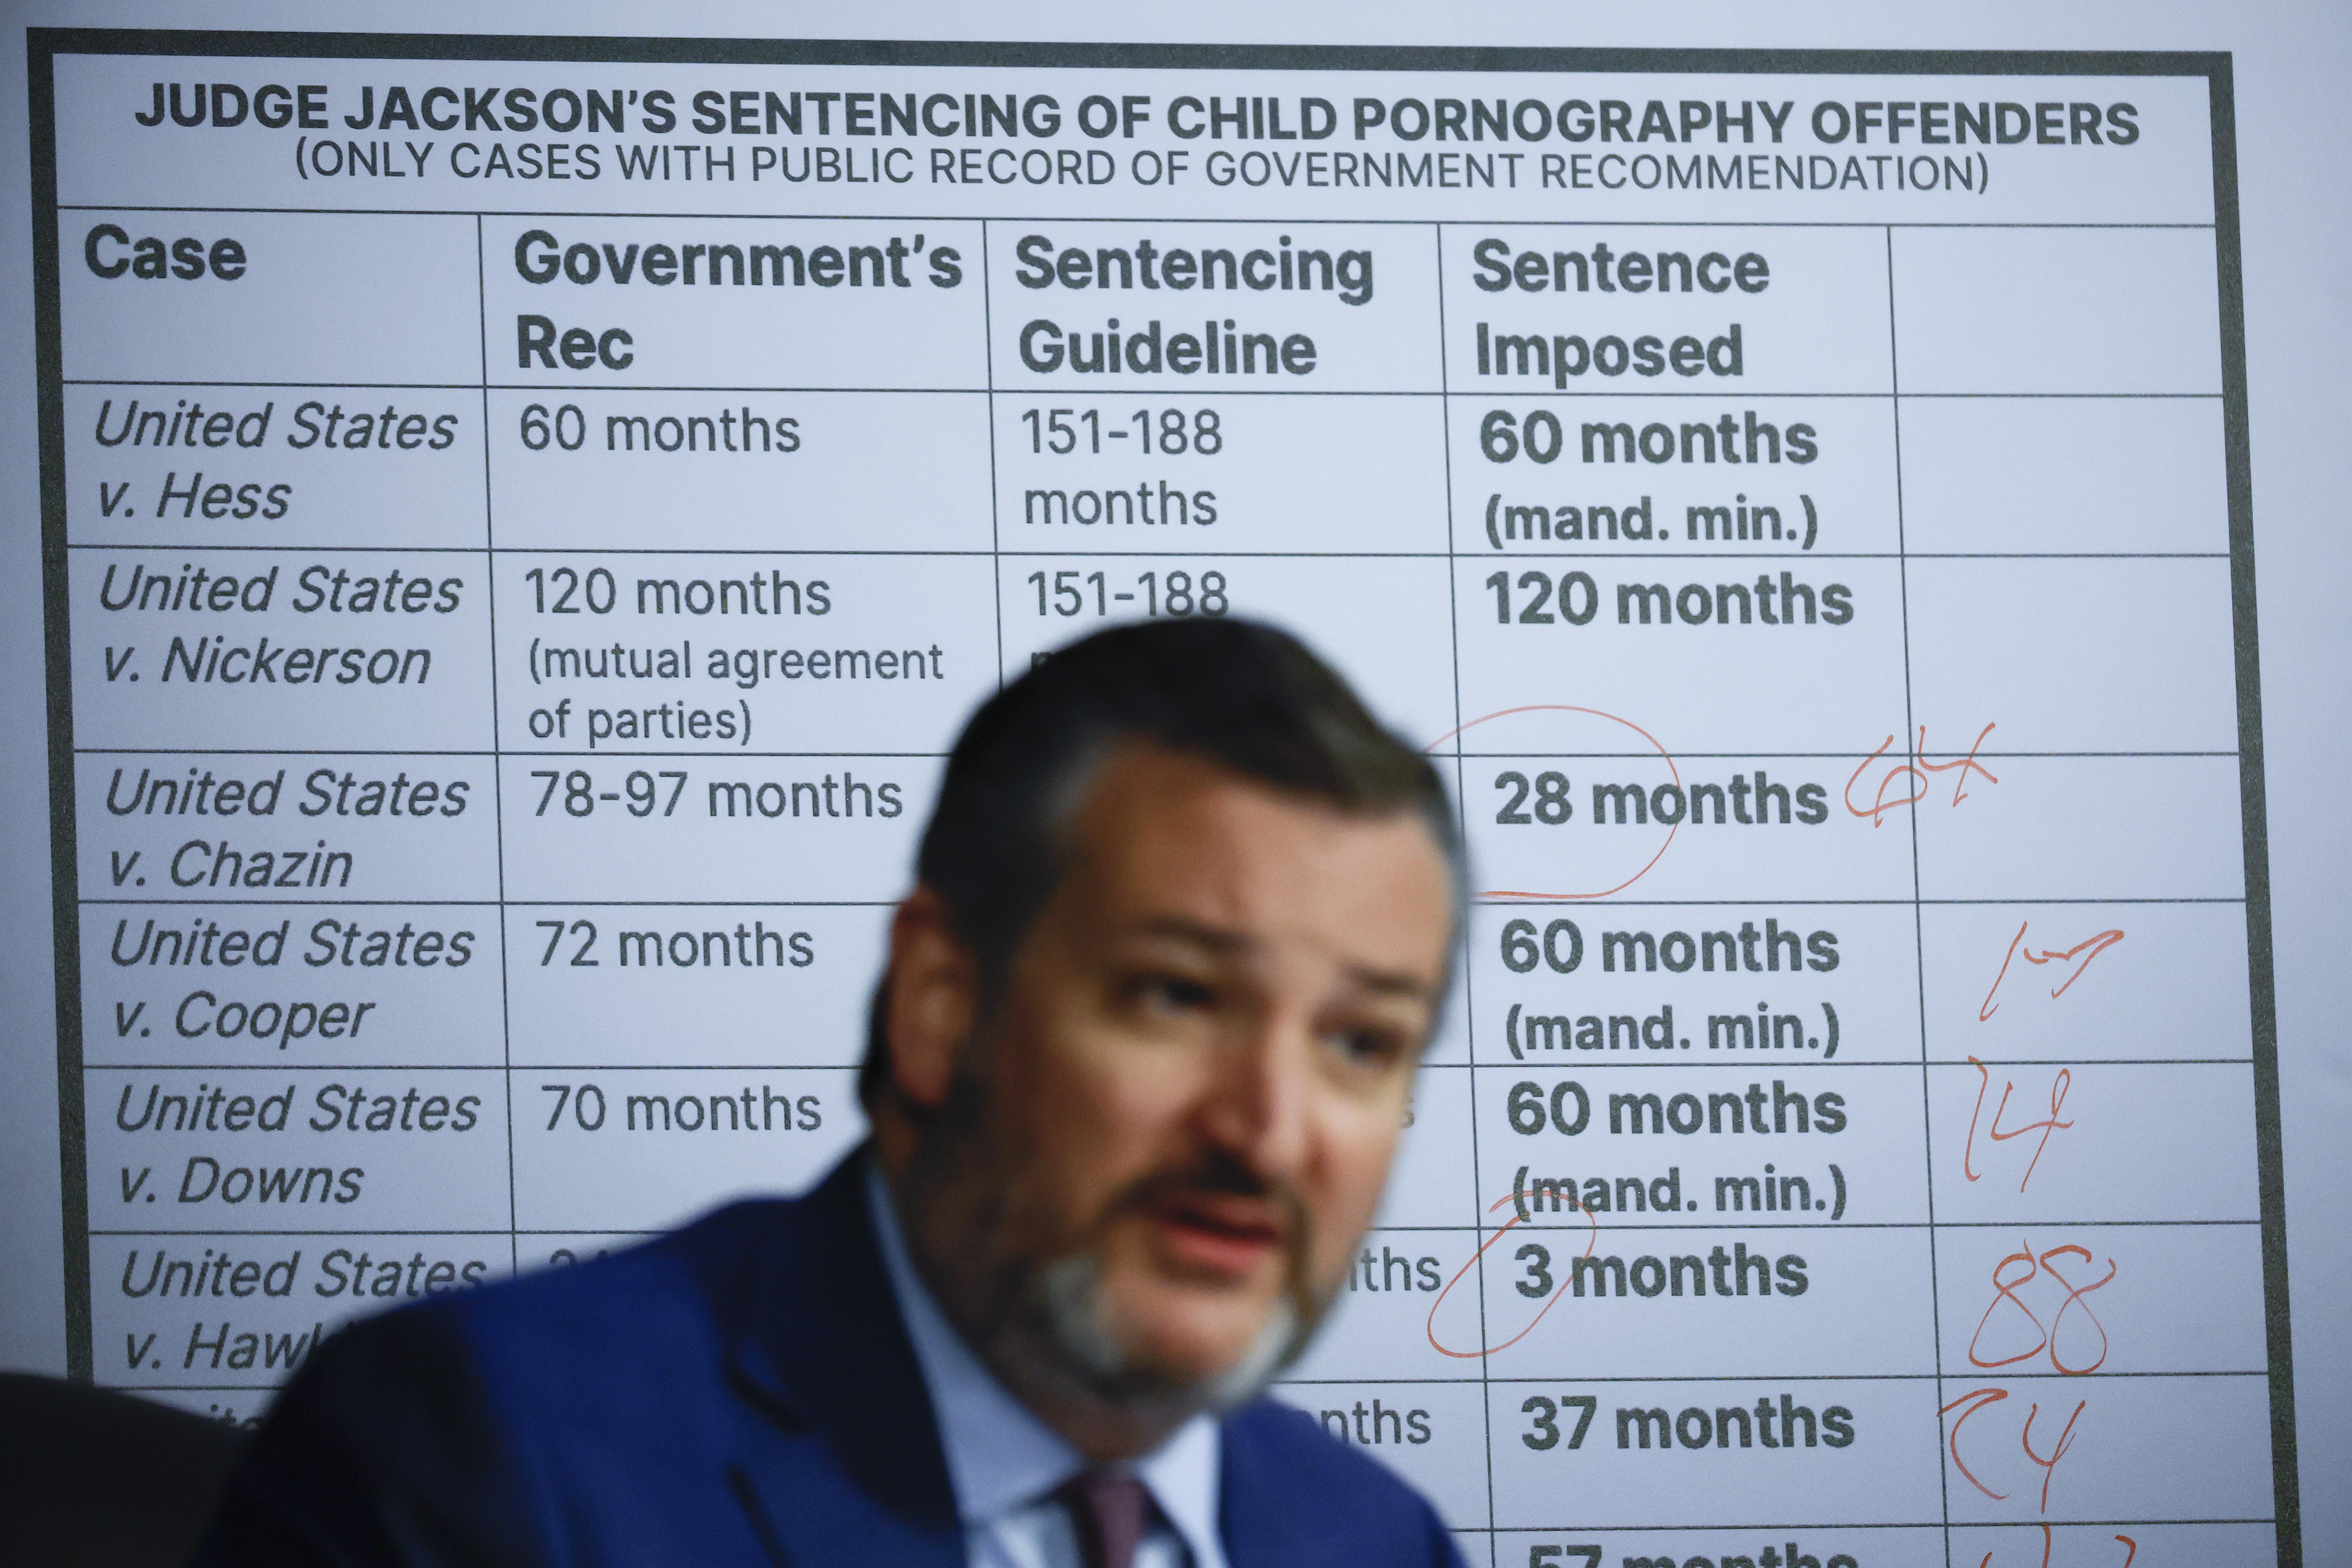 Cruz speaks in front of a chart listing sentencing recommendations and Jackson's sentences for child pornography offenders